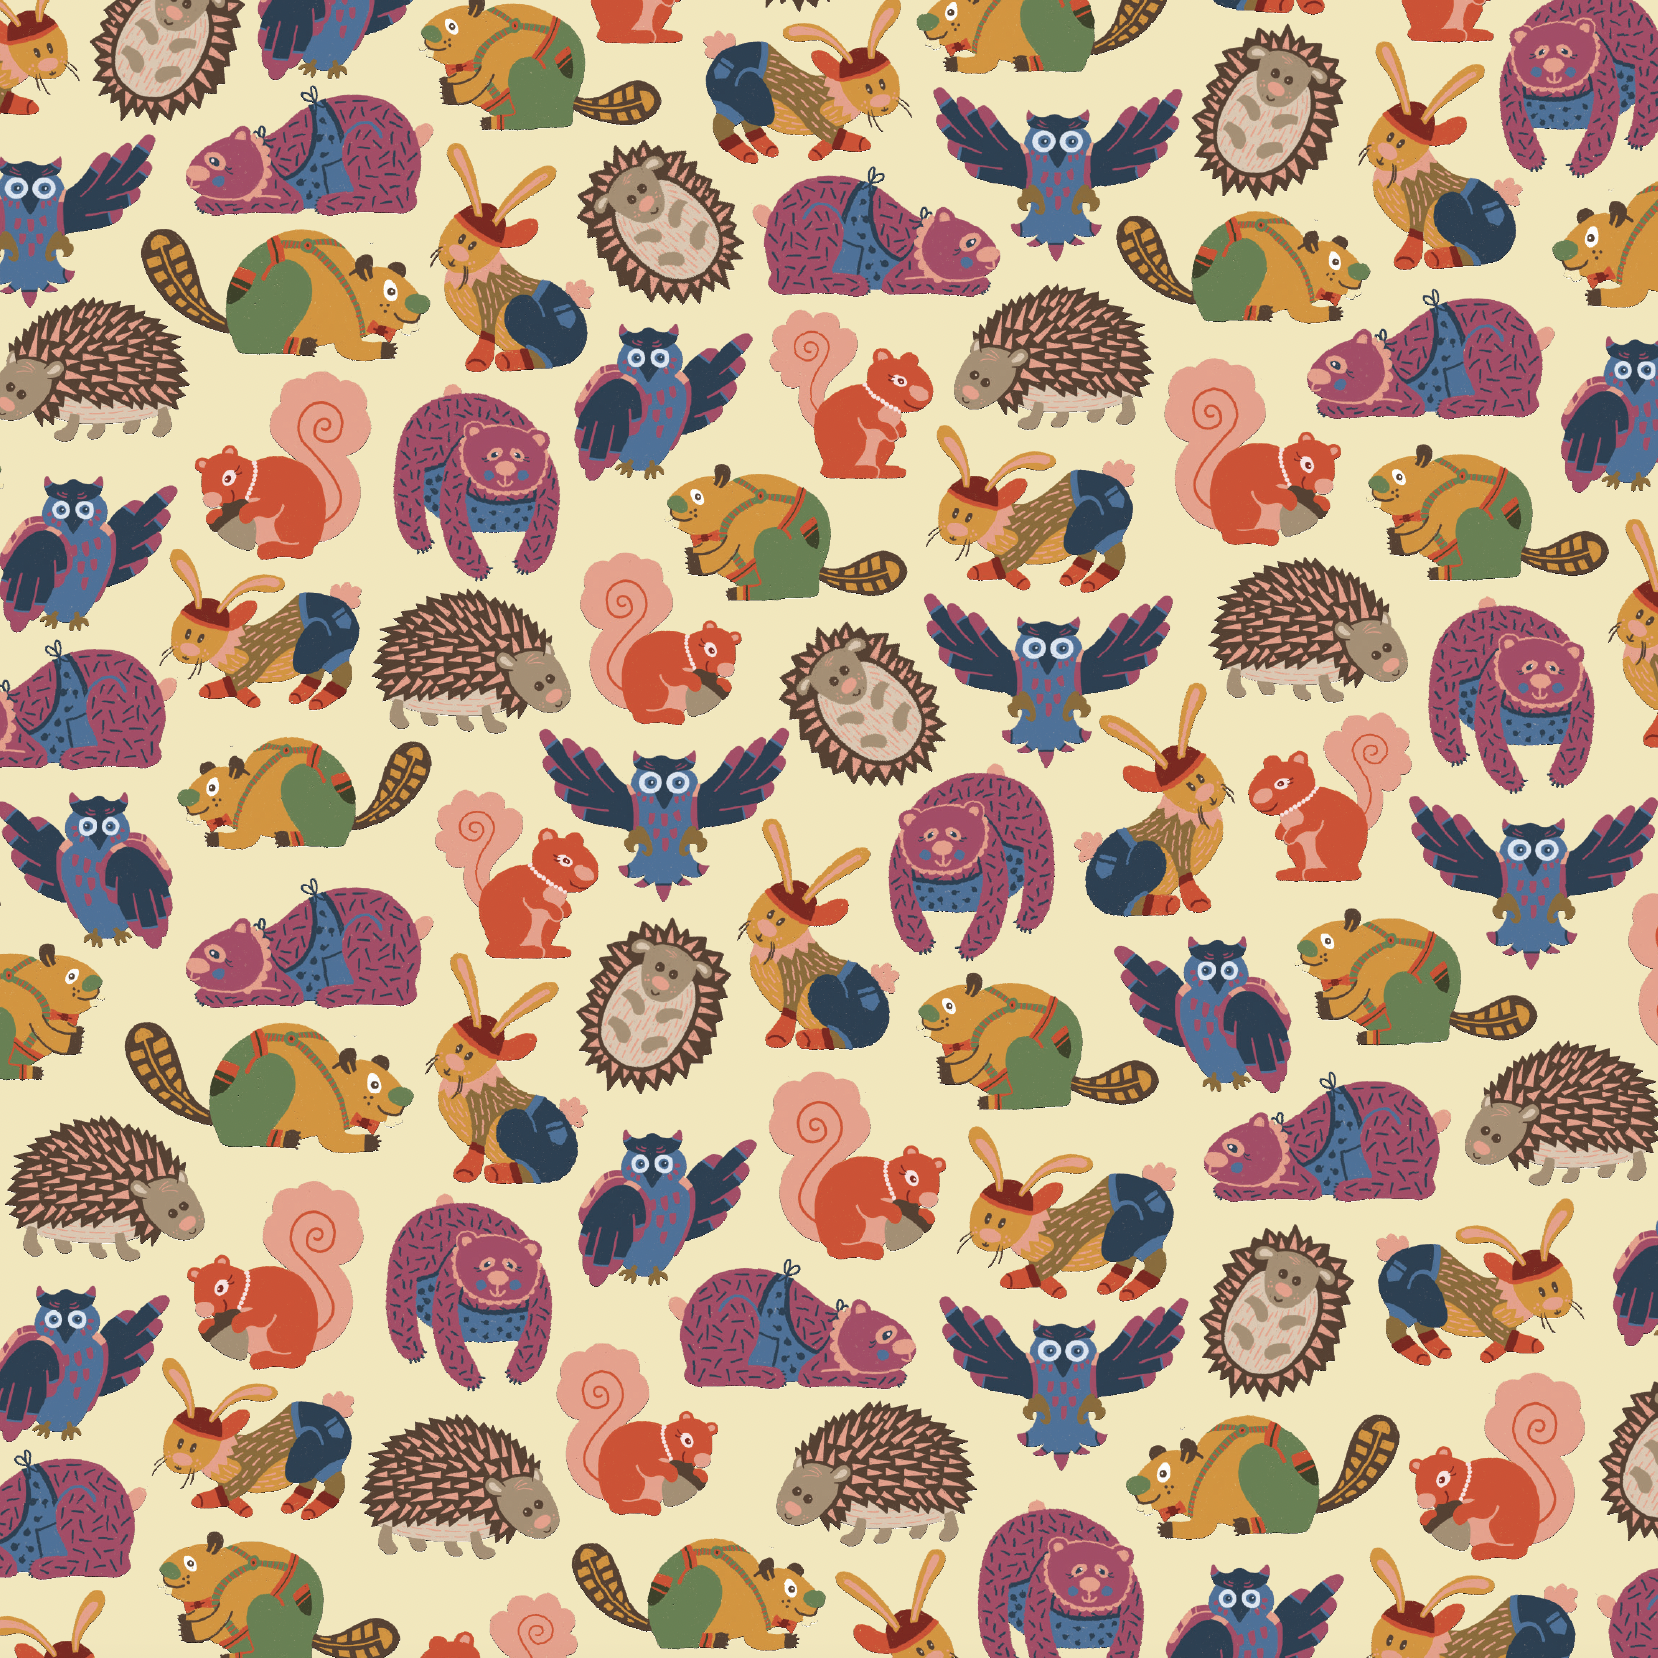 pattern of forest animals including a squirrel, beaver, bunny, porcupine, and bear